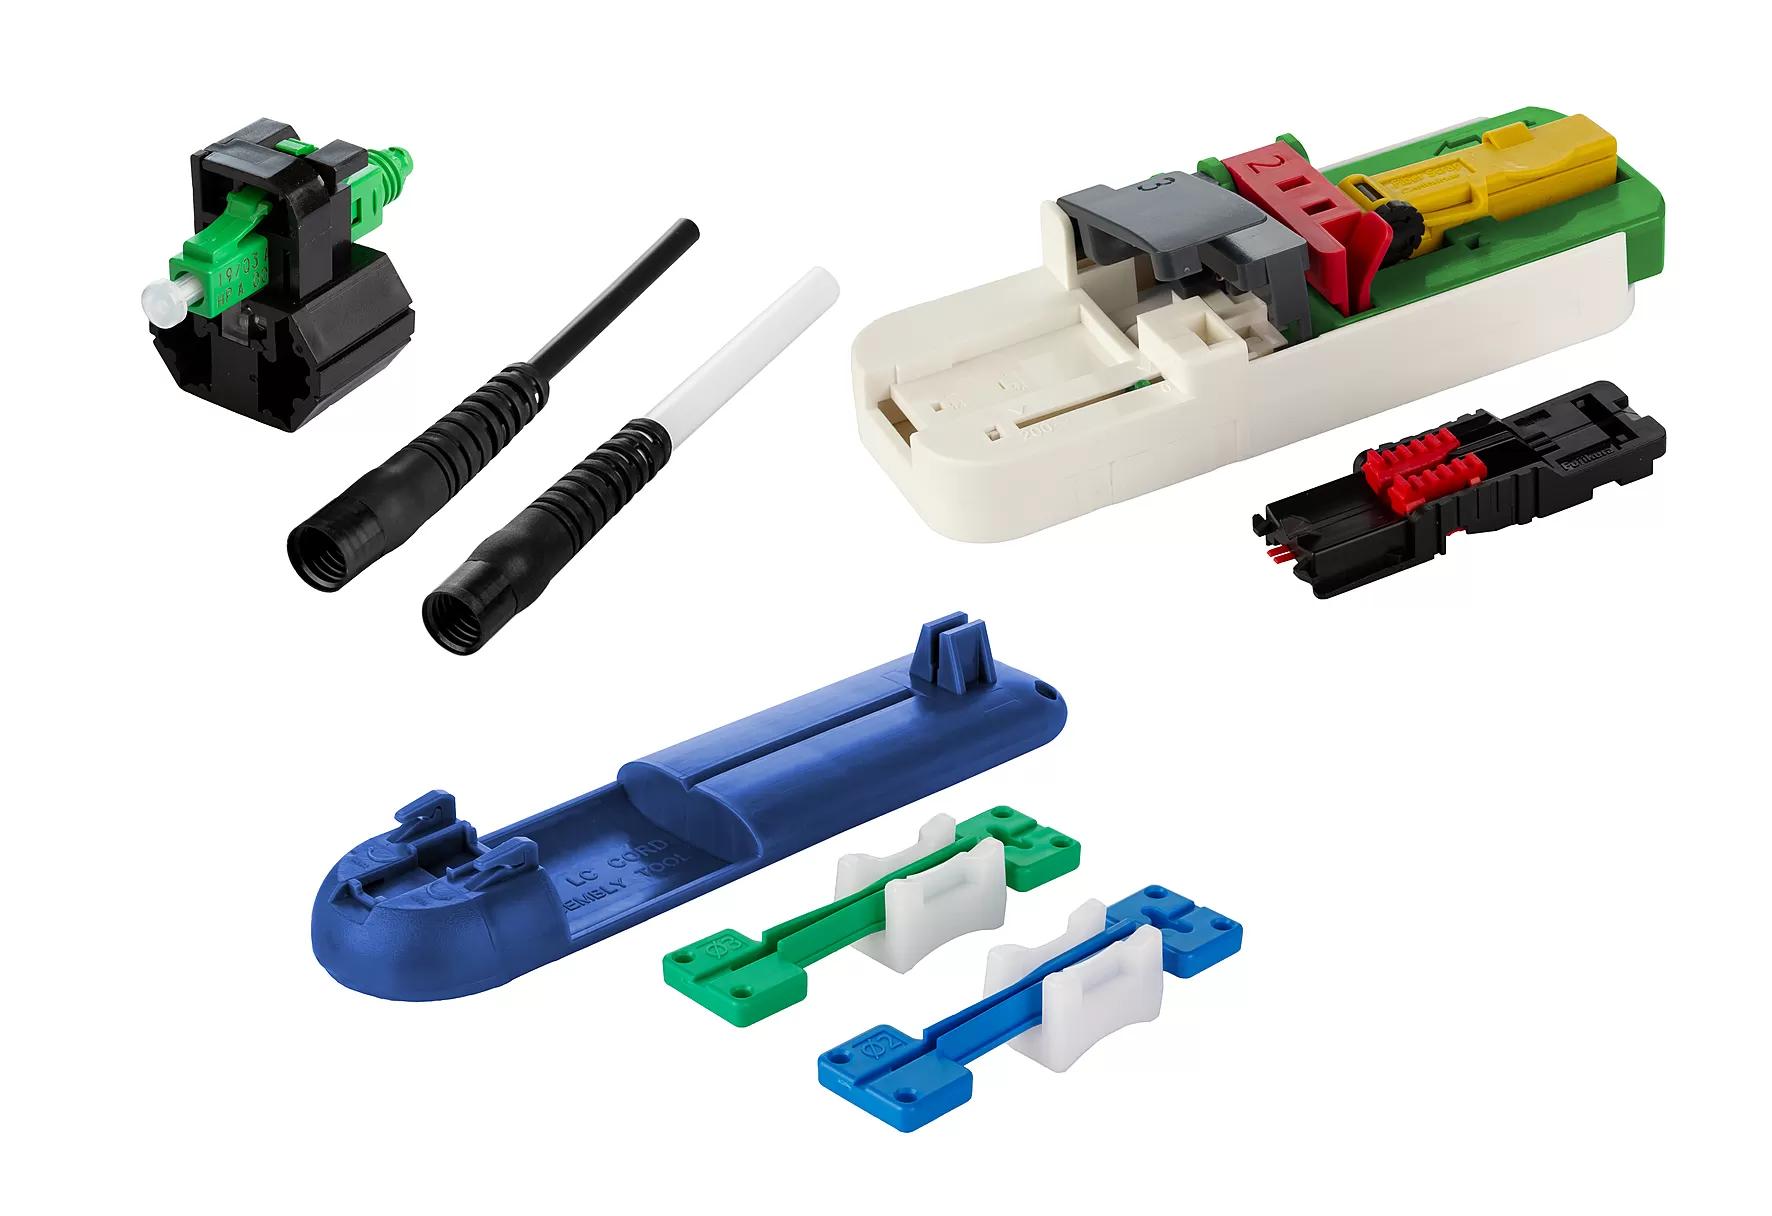 Metz Connect OpDAT FAST Hybrid Steckerbausatz LC APC OS2 100 Stück für Kabel Ø 2,0 + 3,0 mm inkl. Cleaver-Set, Faser-Guide und Kabelassemblierungsset 1509QKJA010C-E